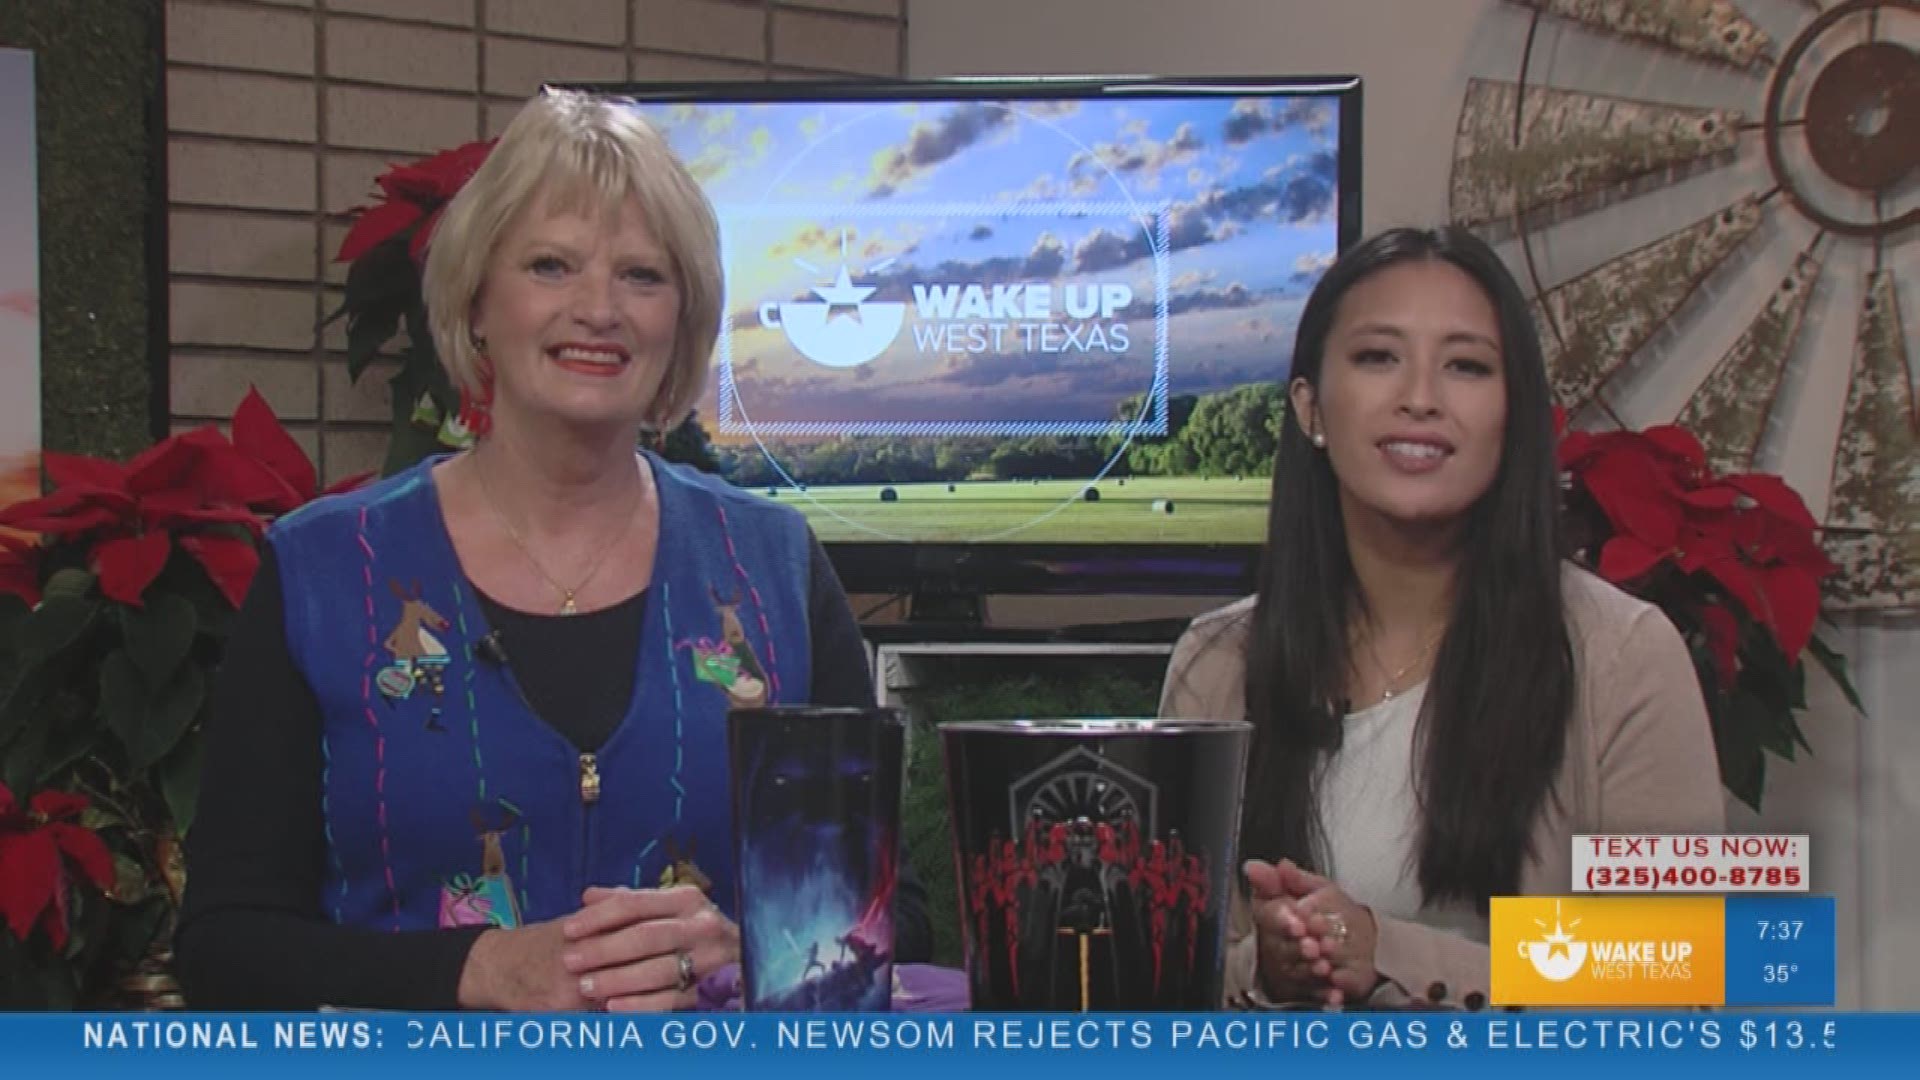 Our Camille Requiestas sat down with Linda Grace about the upcoming events and prizes held by Vitalant.